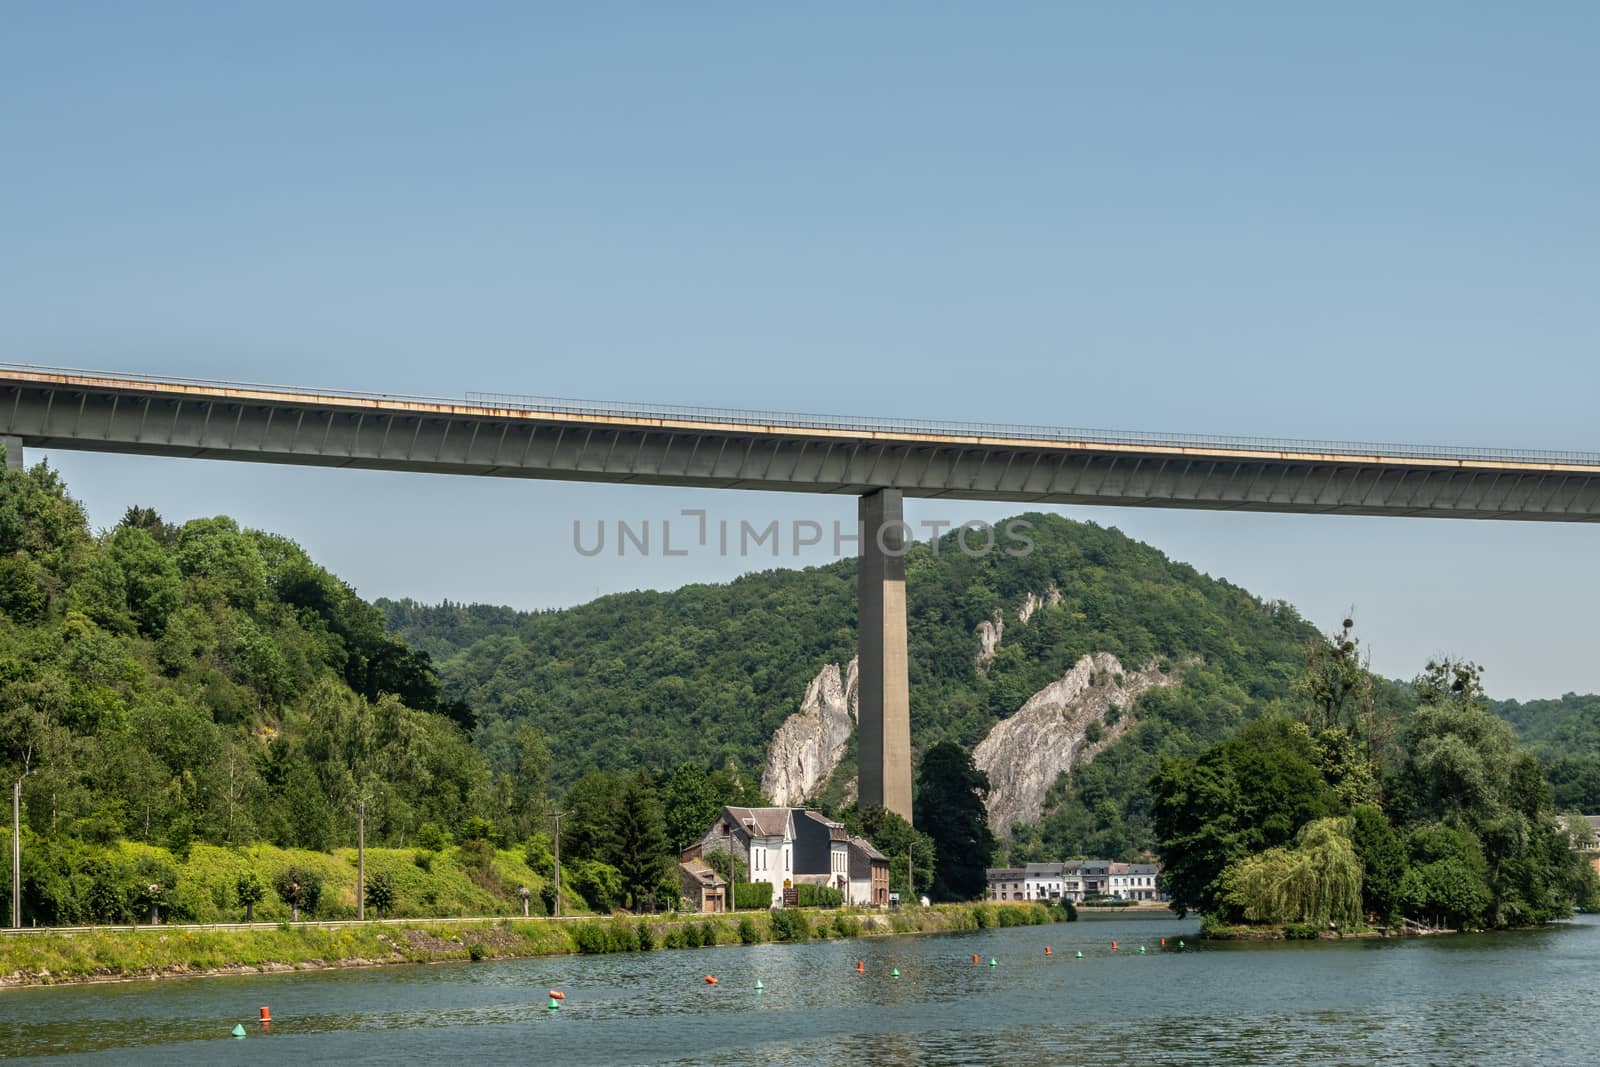 Route Charlemagne bridge over Meuse River, Dinant Belgium. by Claudine